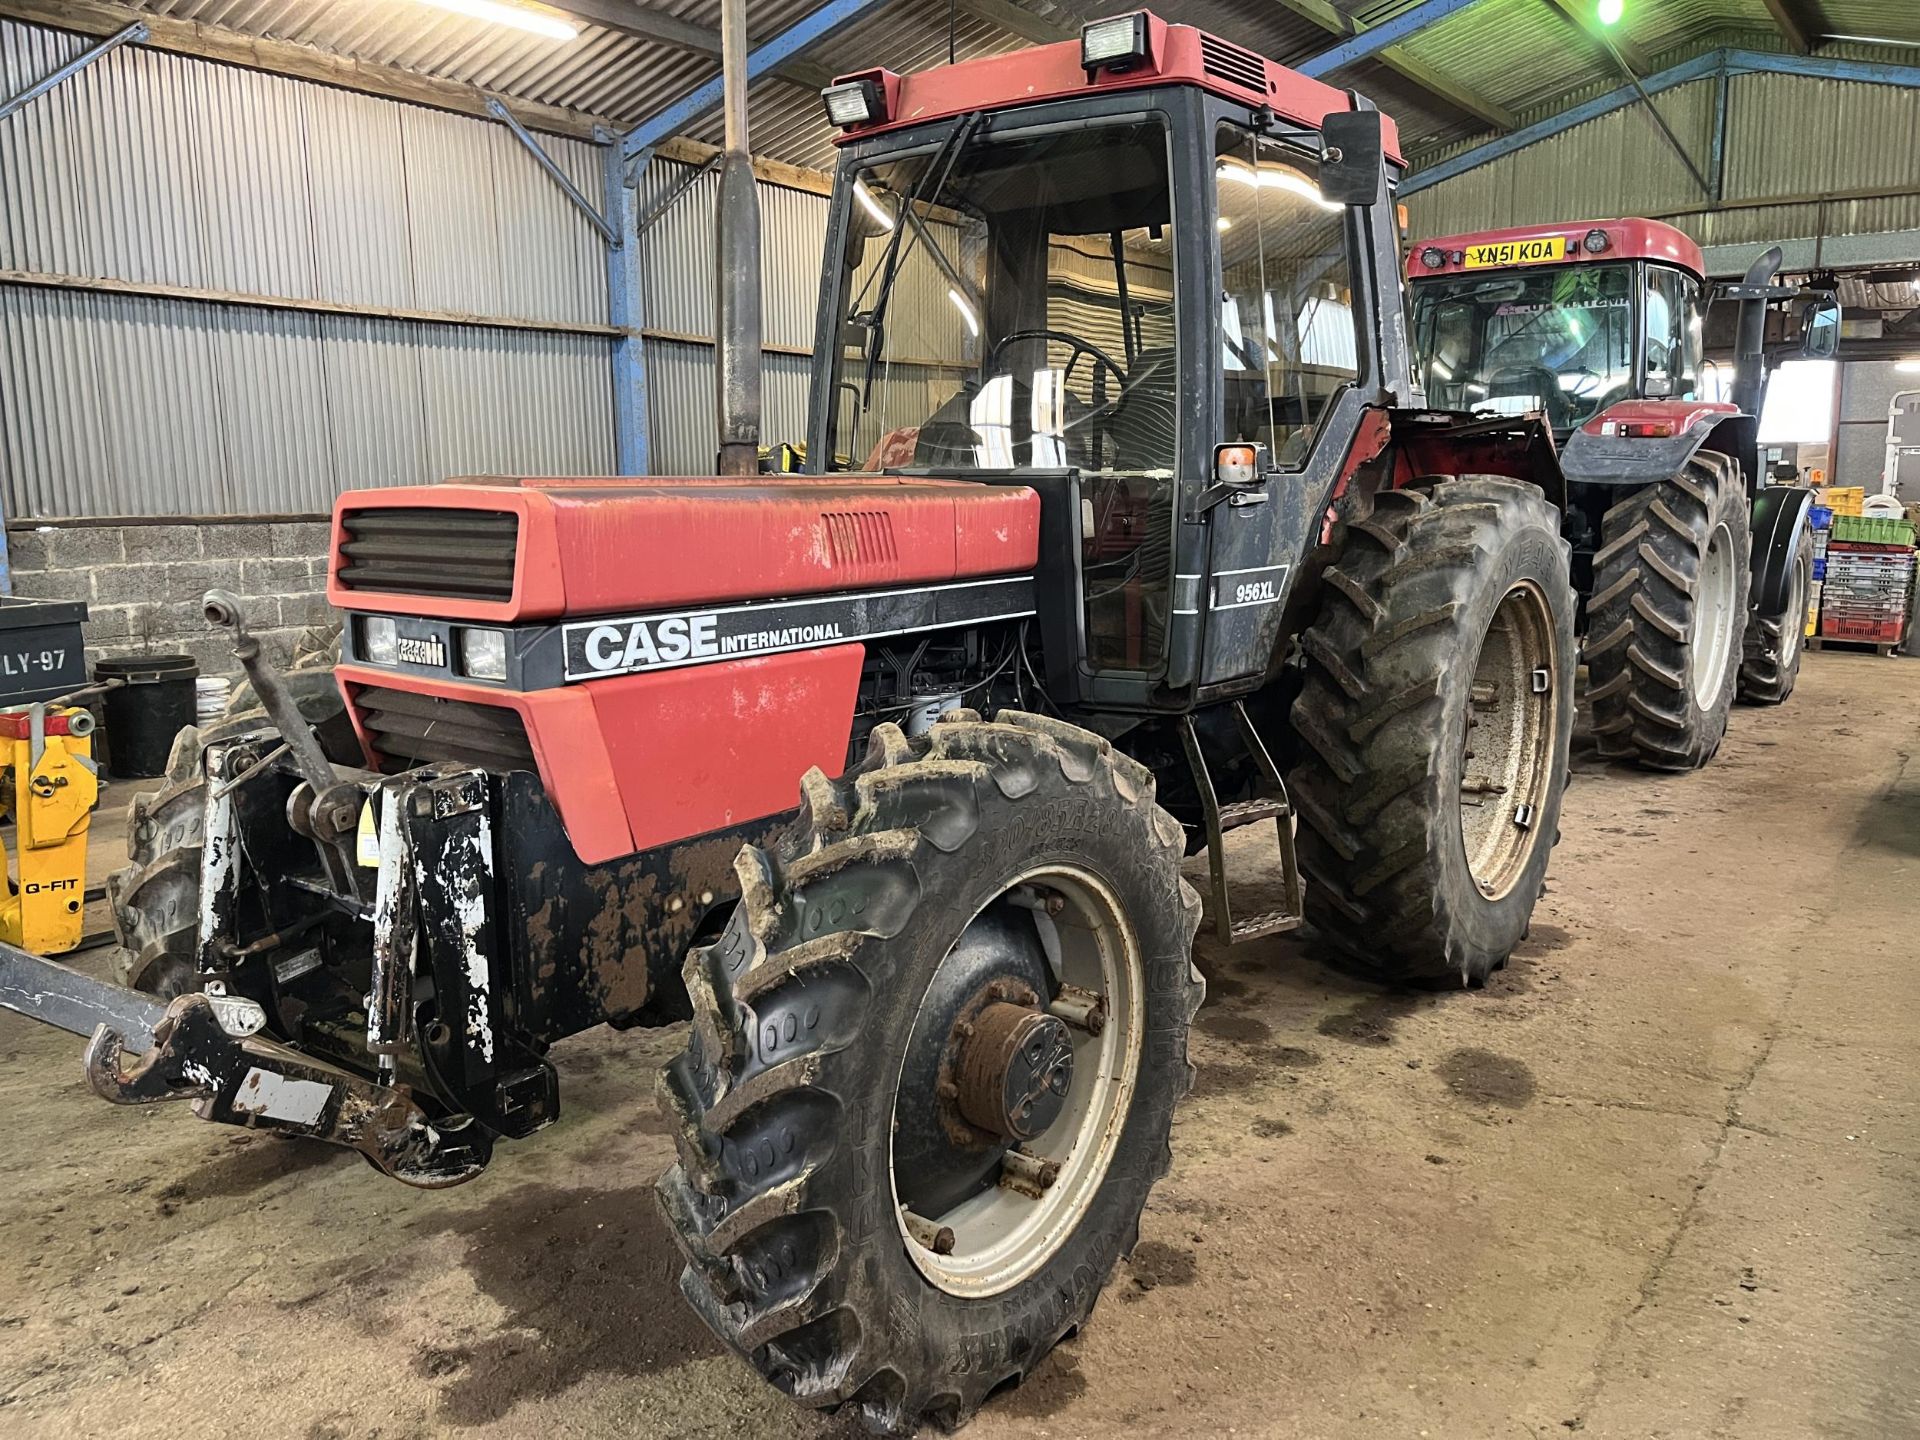 CASE 956XL IH TRACTOR, (1988), 4WD, HRS UNKNOWN (SHOWING 2832), REG NO F101 JVL (MANUAL IN OFFICE)